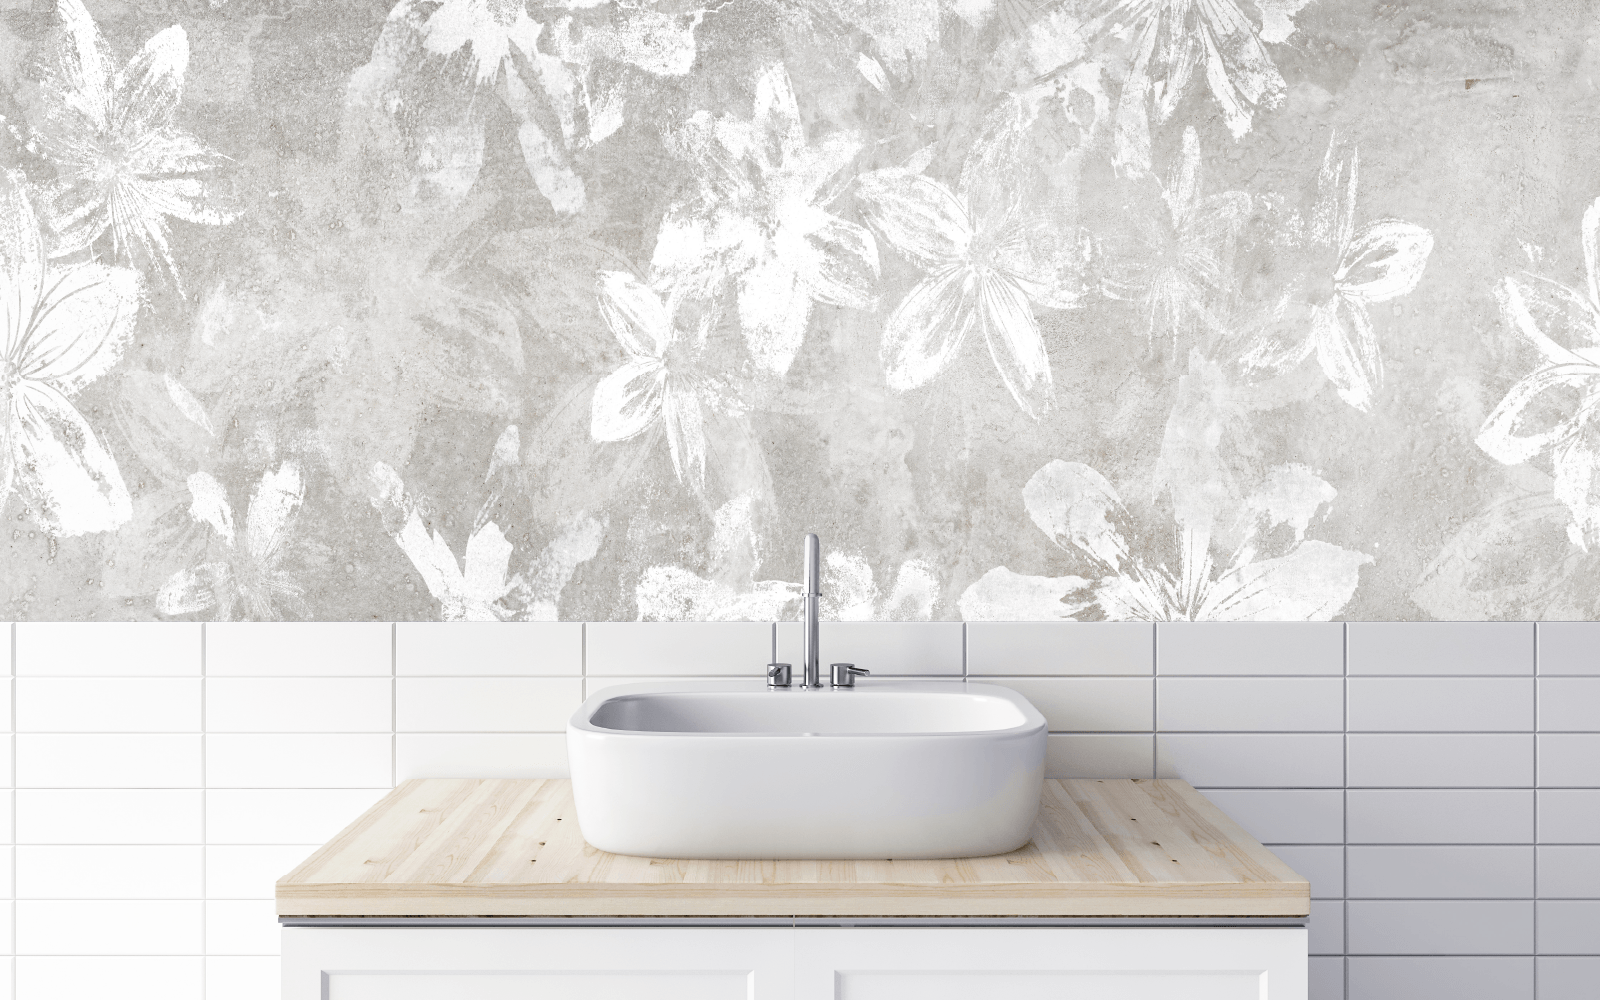 Graphic of white flowers on a concrete wall above and behind a vessel sink on a light wood and white vanity in front of parallel tiles.